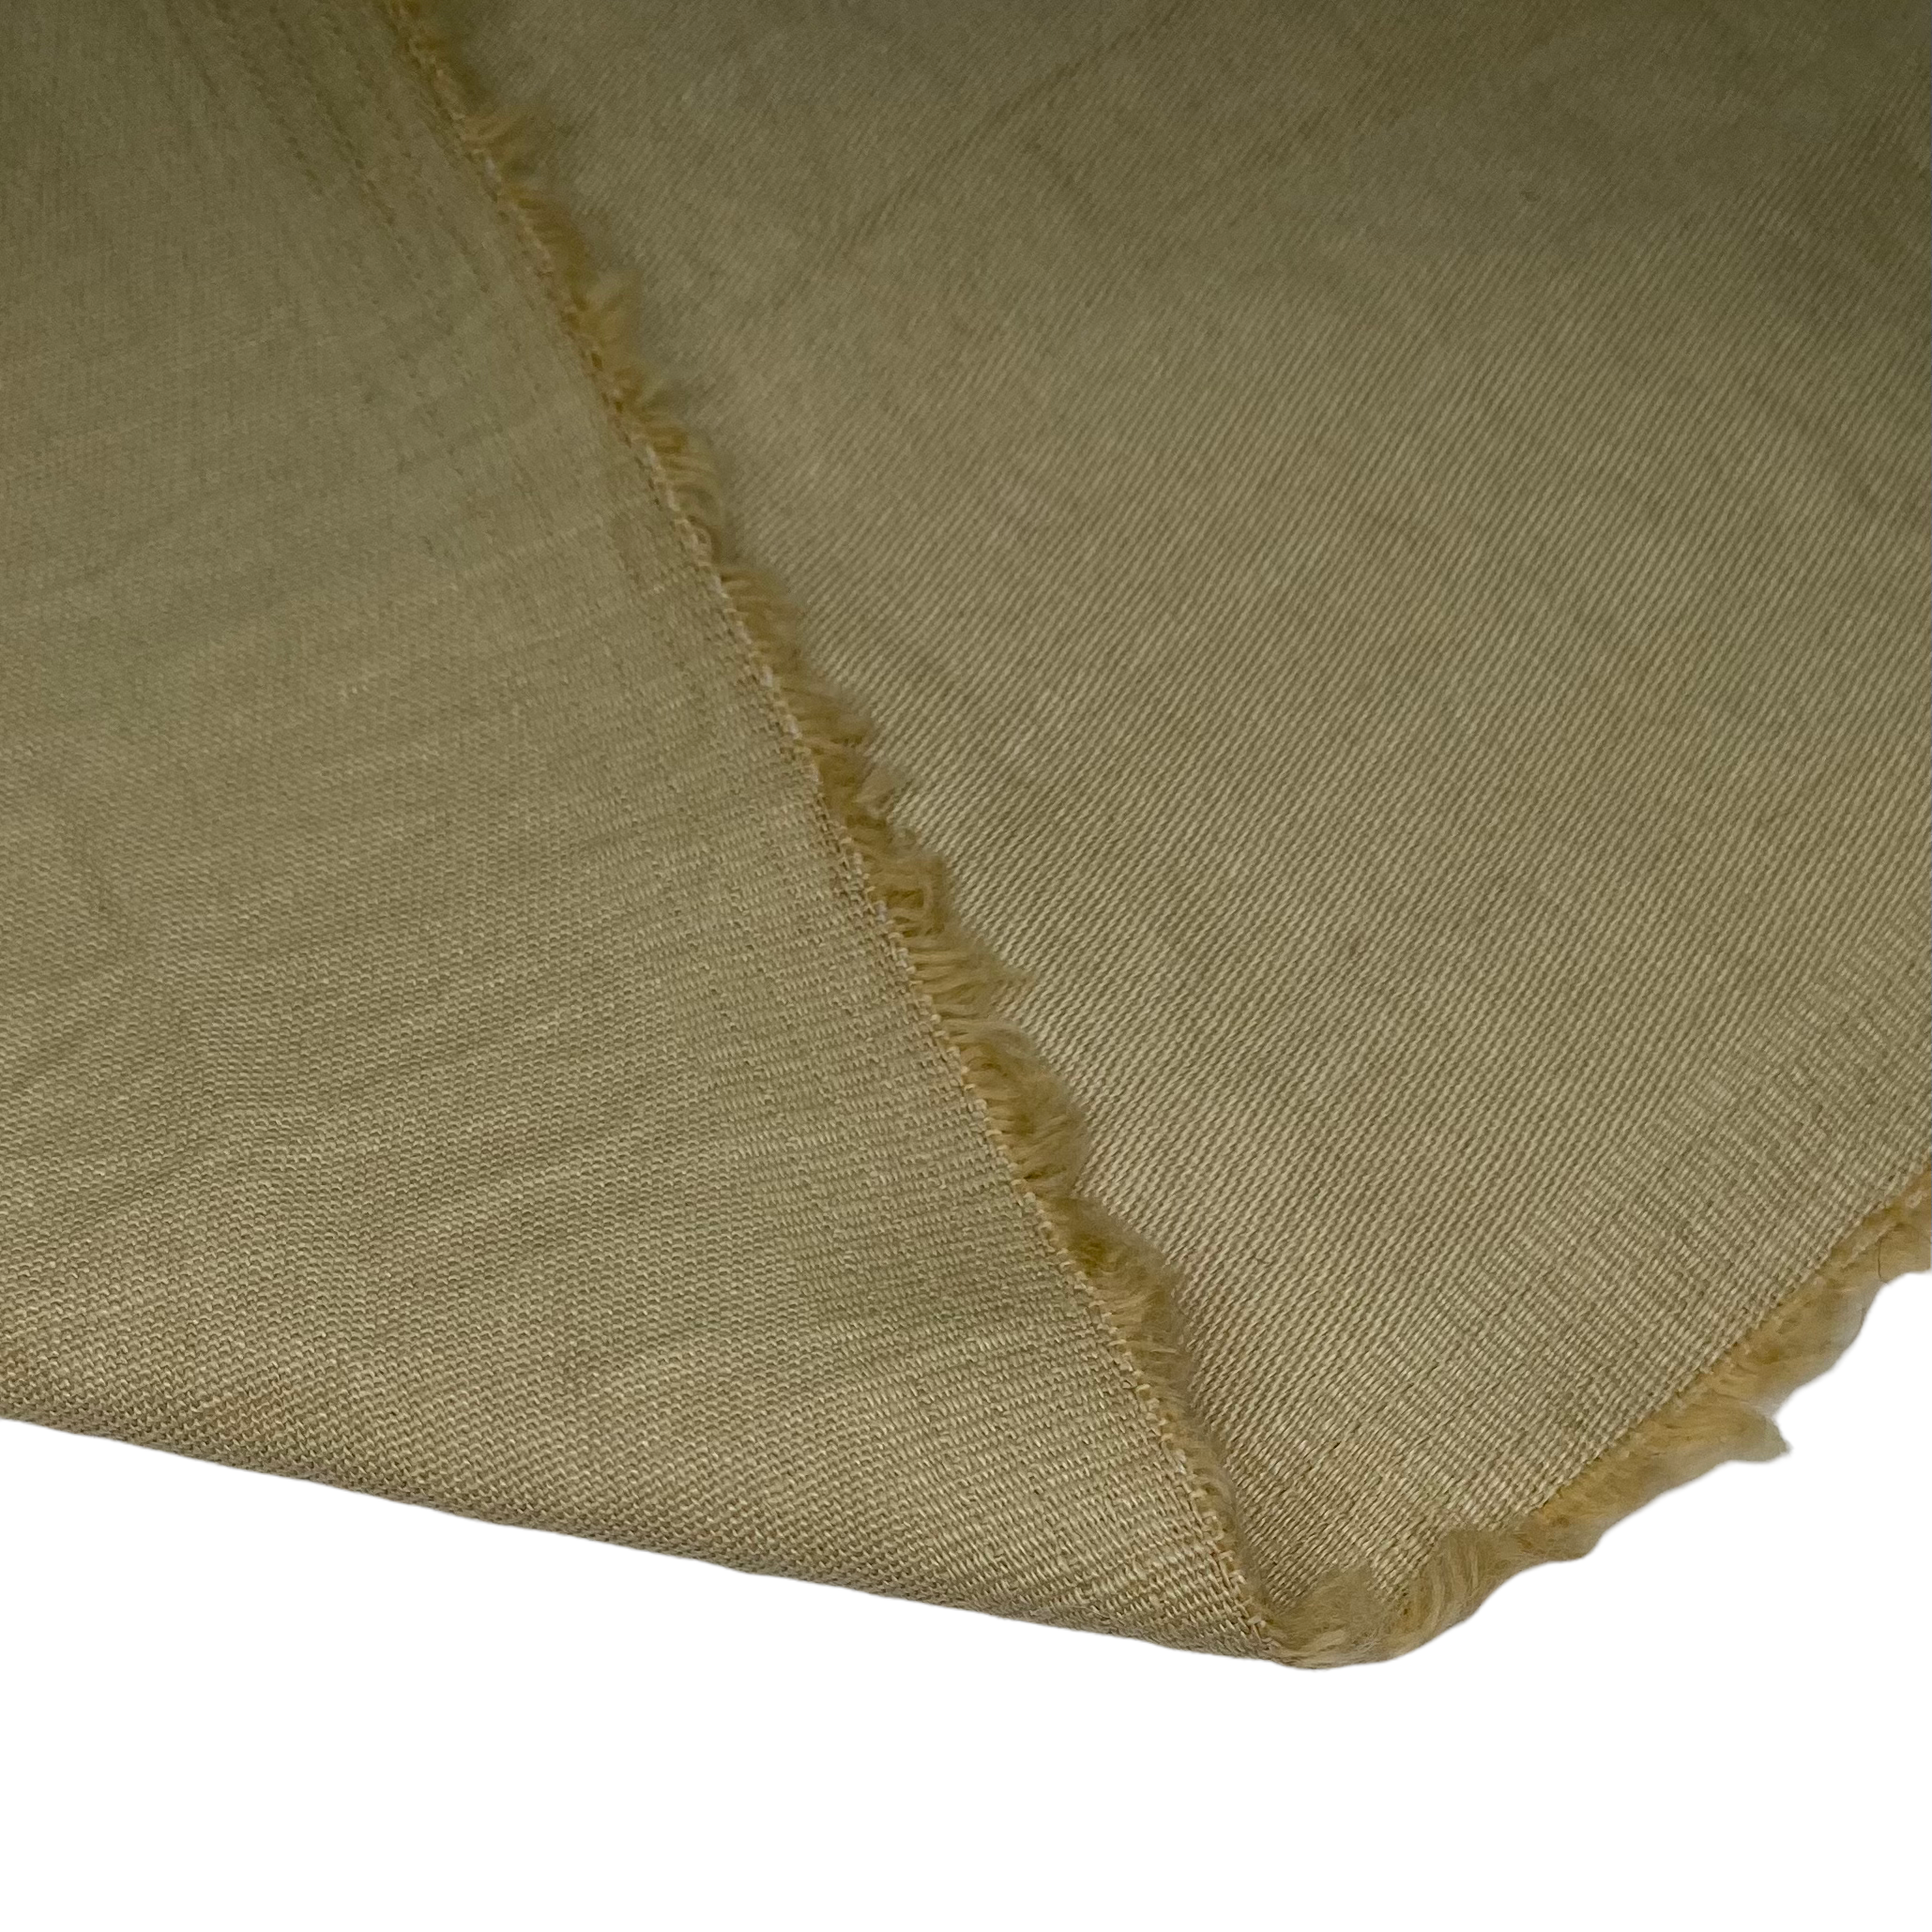 Crinkled Twill Cotton Canvas - 7oz - Brown